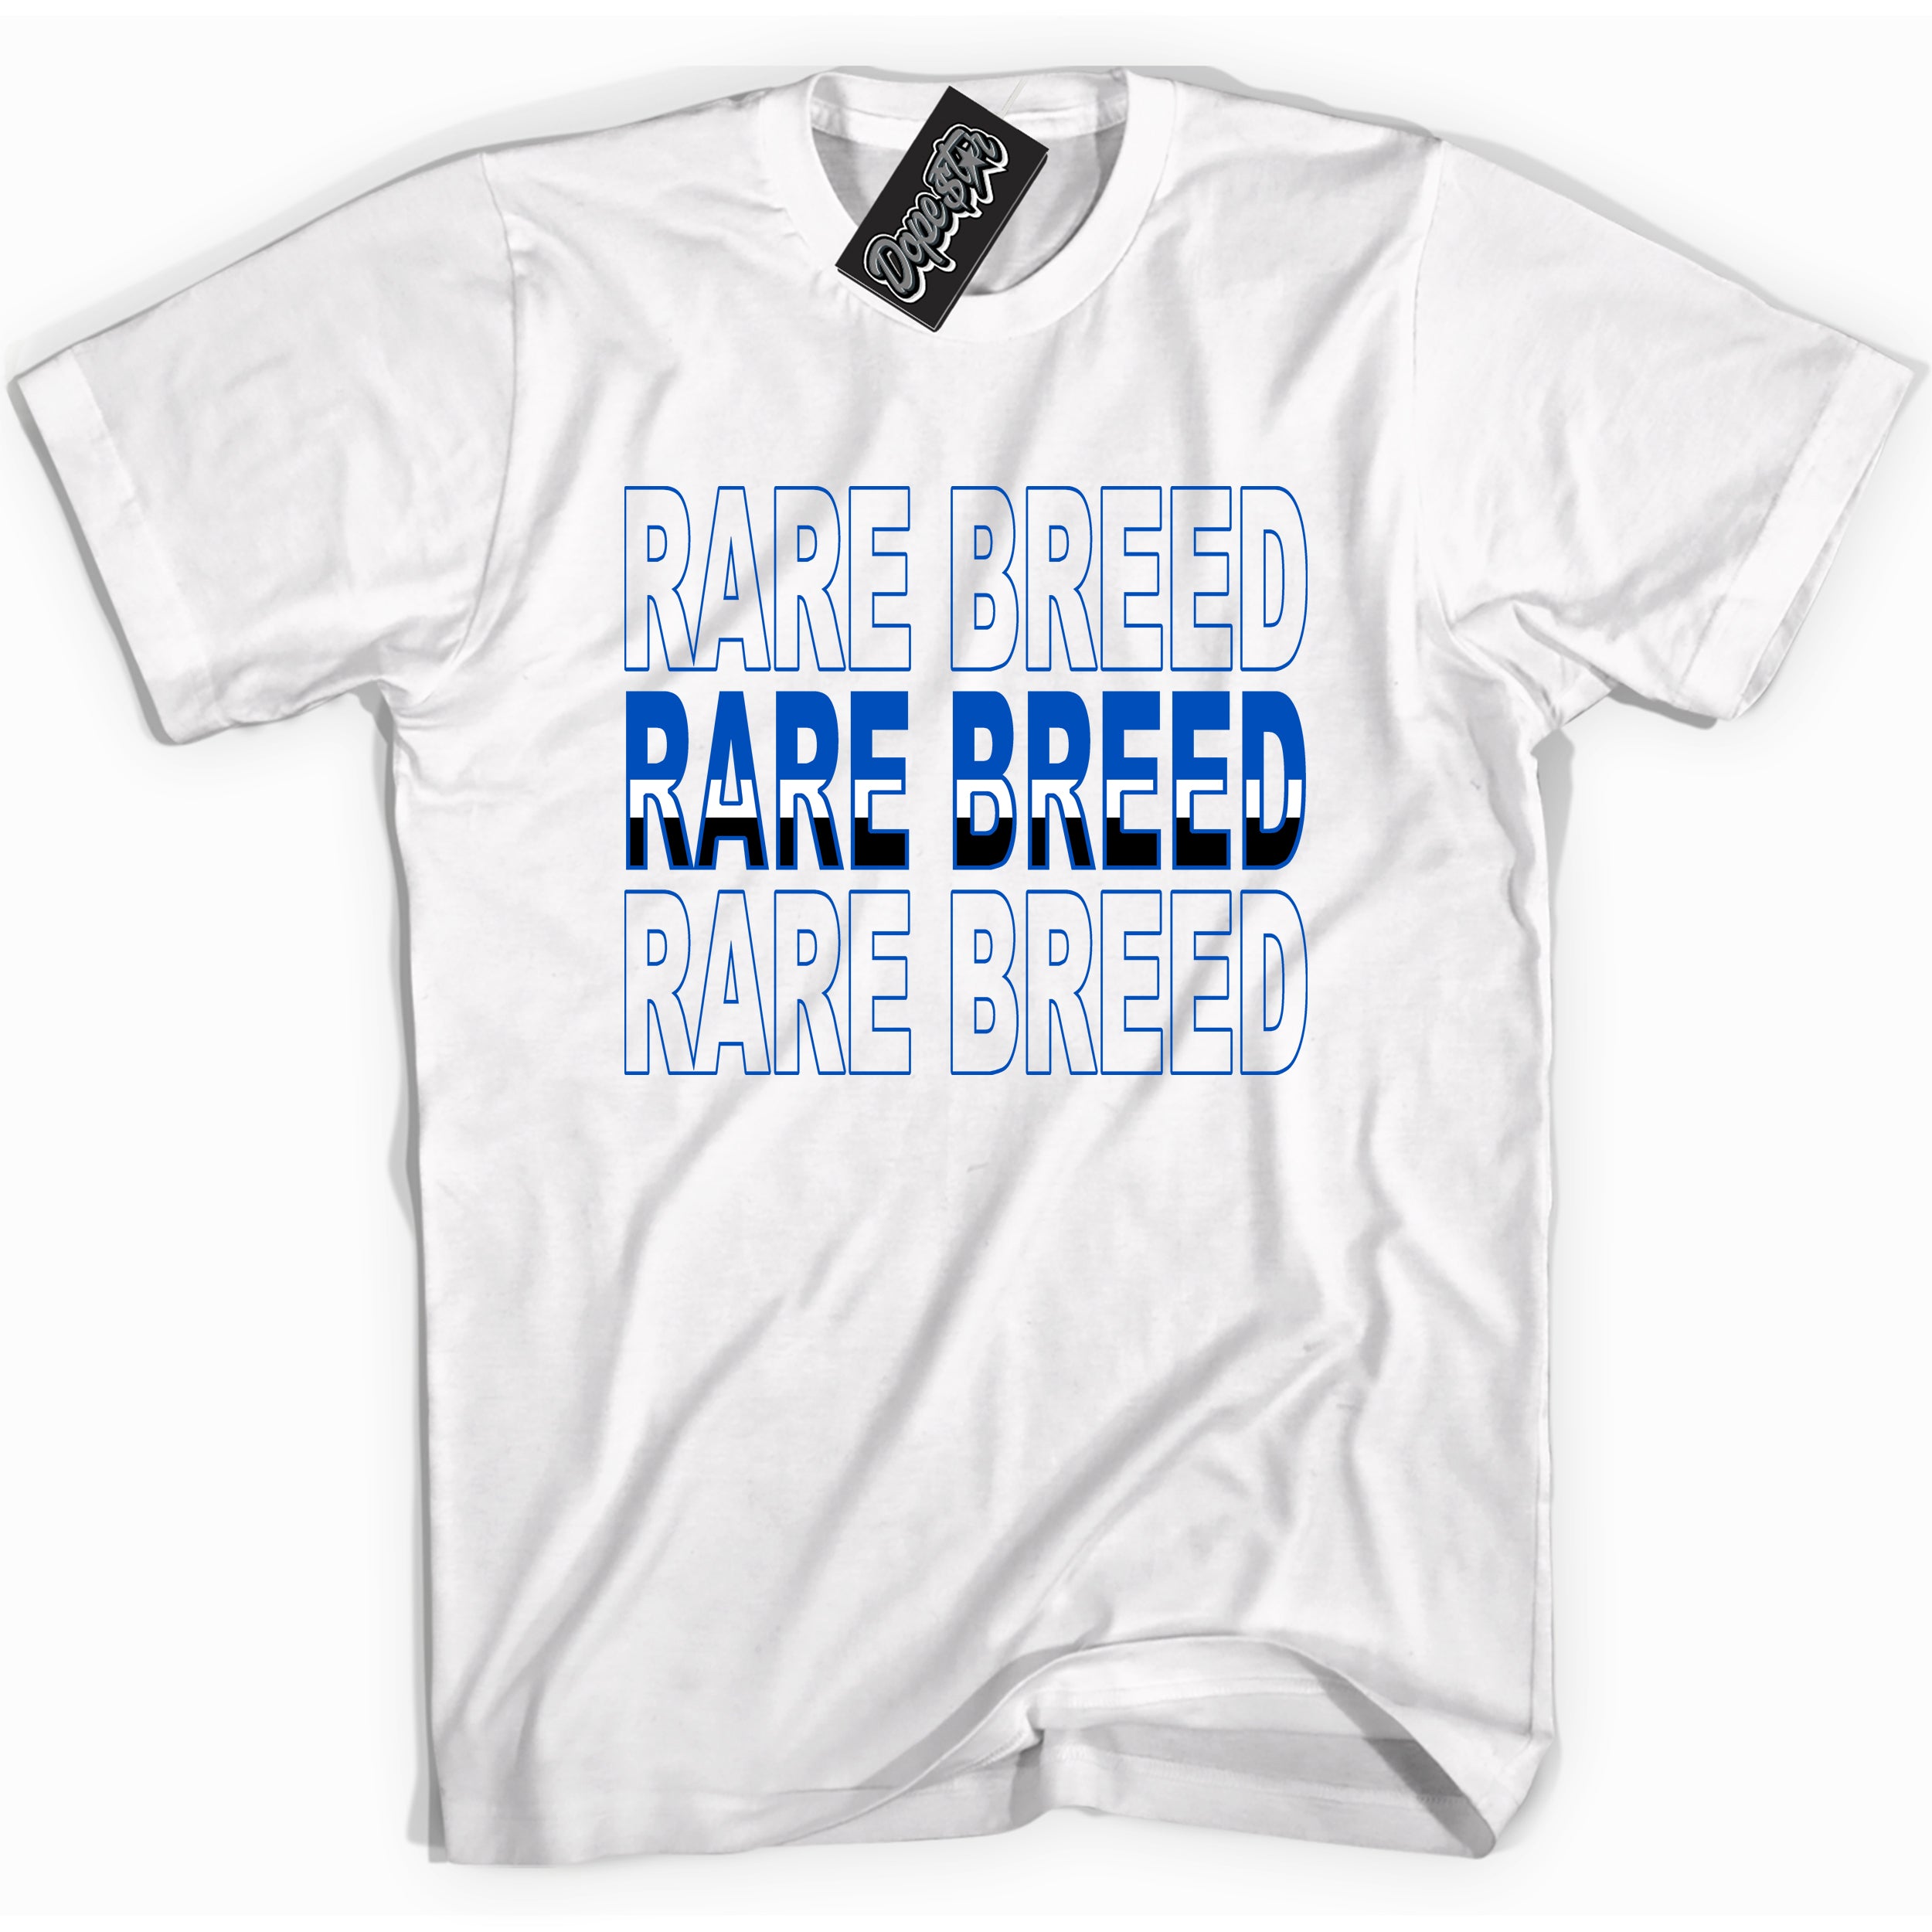 Cool White graphic tee with Rare Breed print, that perfectly matches OG Royal Reimagined 1s sneakers 